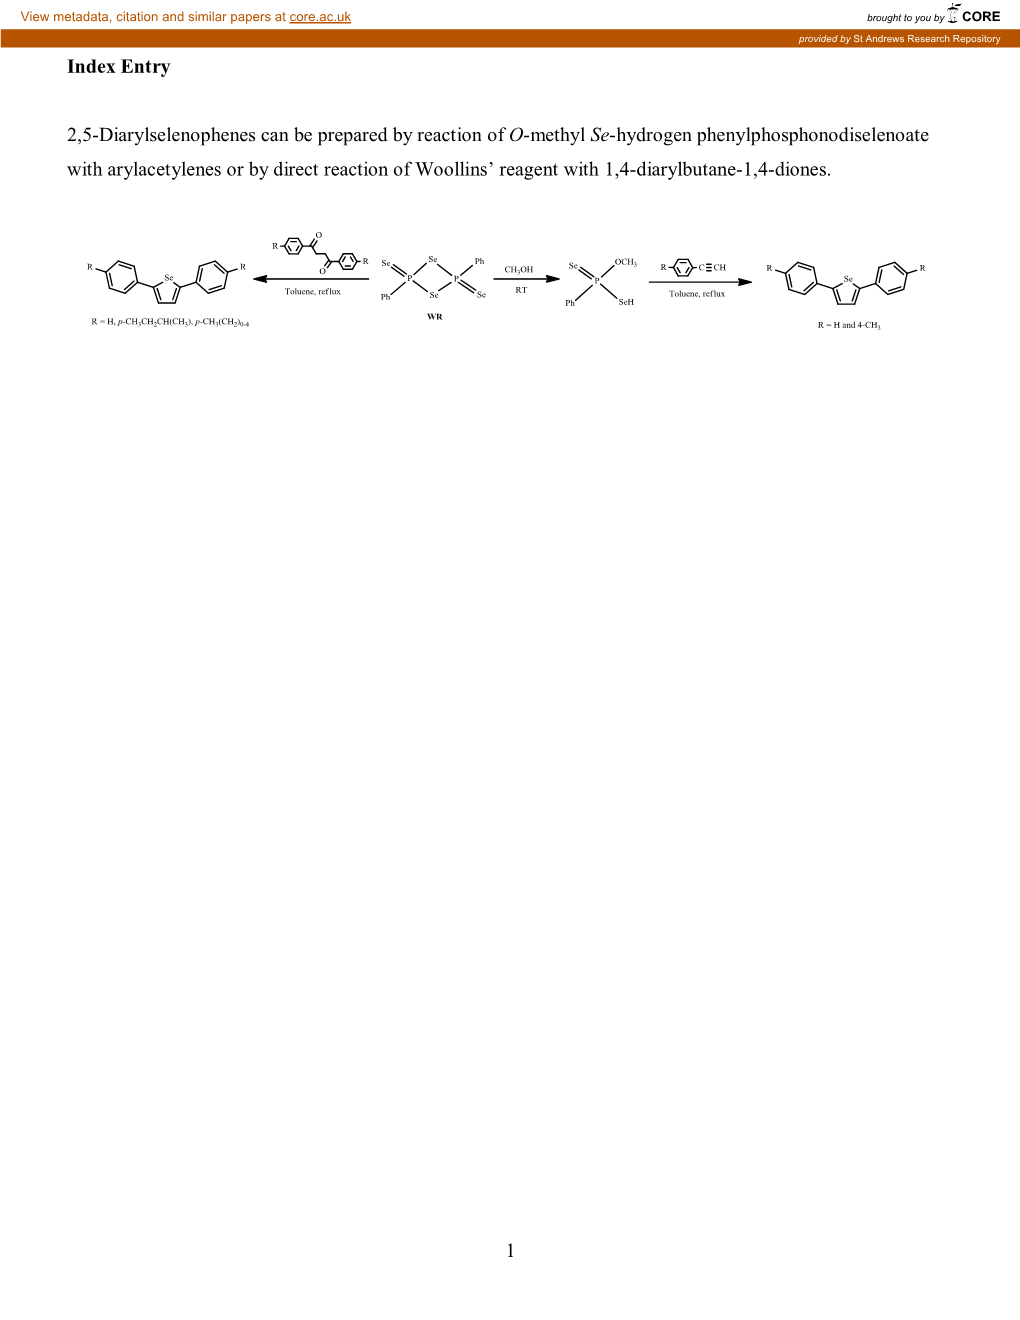 Reactivity of WR Towards Diamines and Diols